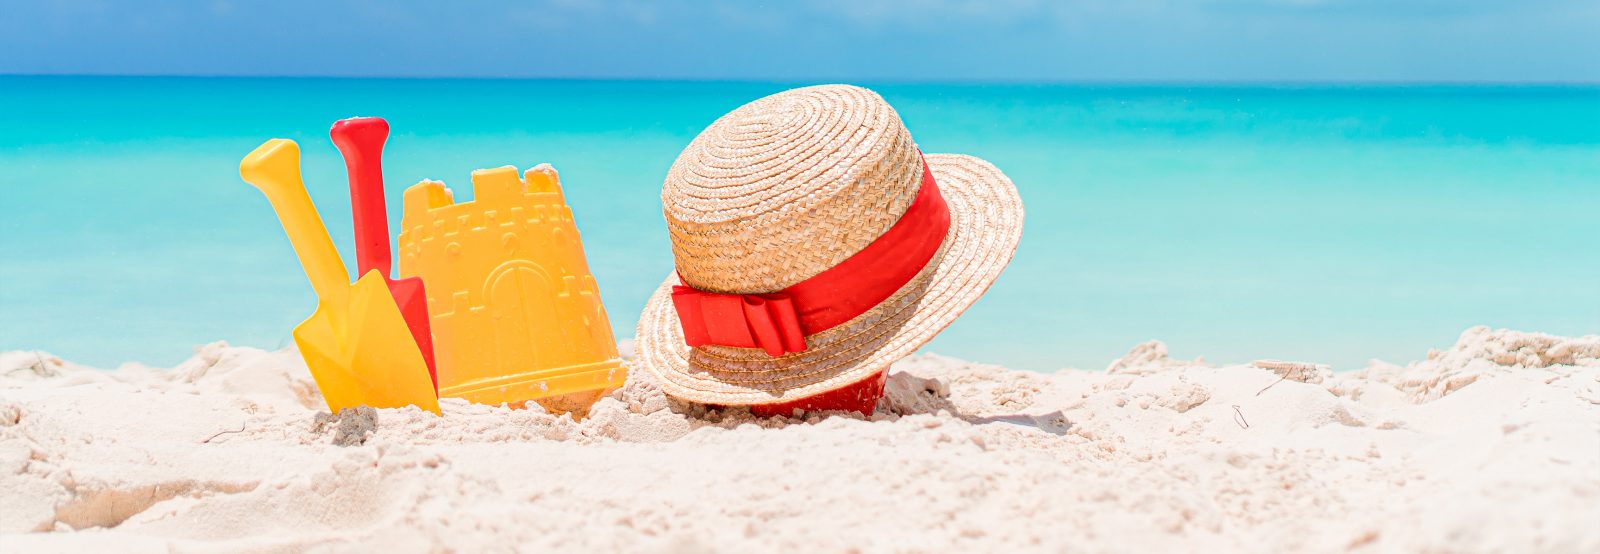 Beach and sandcastle with hat, Summer and Hardwood Flooring